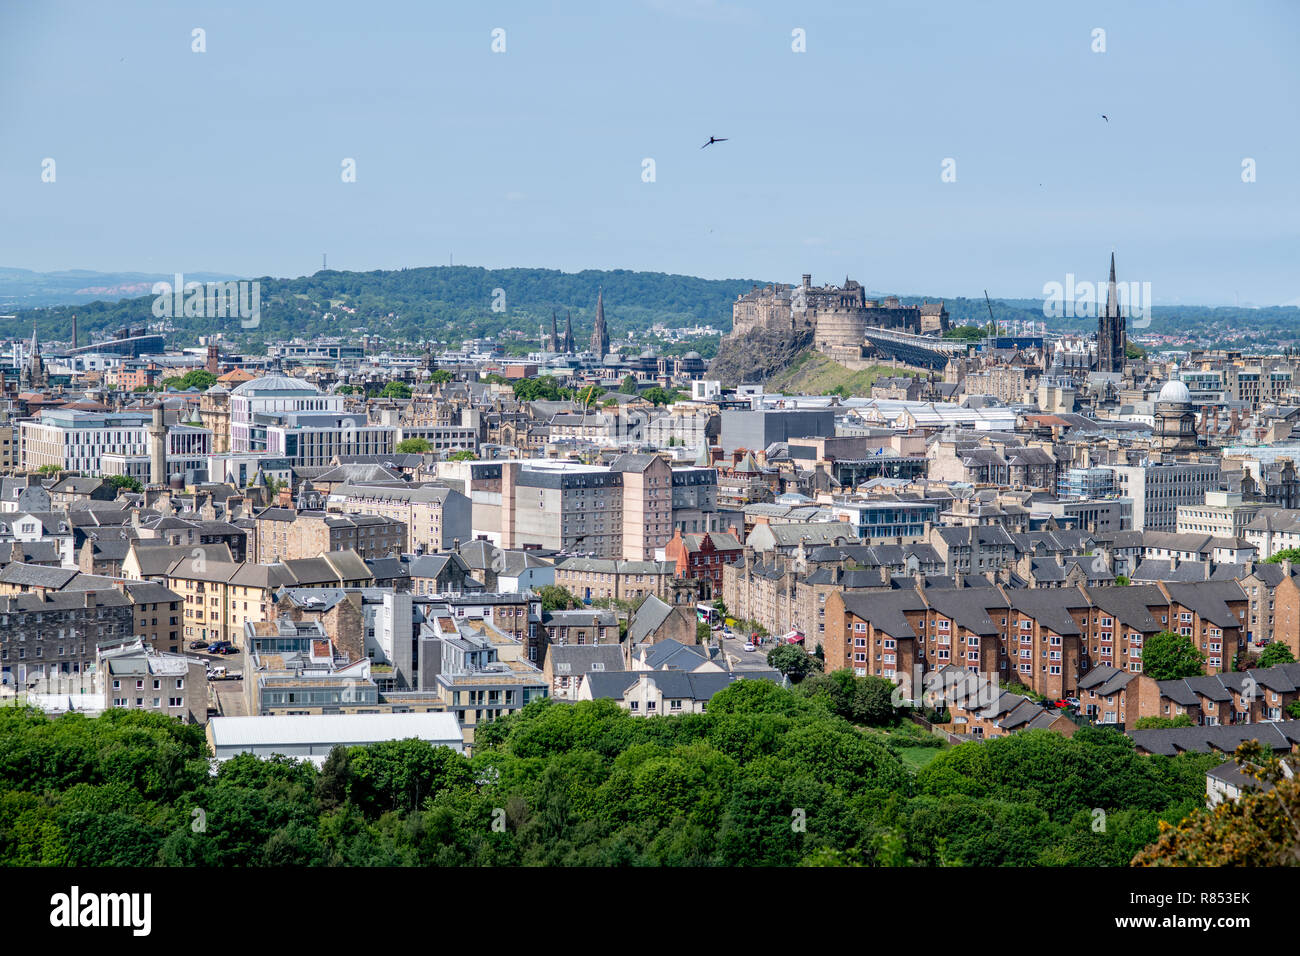 An elevated view of the iconic landmarks, rooftops and the cityscape of Edinburgh, Scotland, UK. Stock Photo